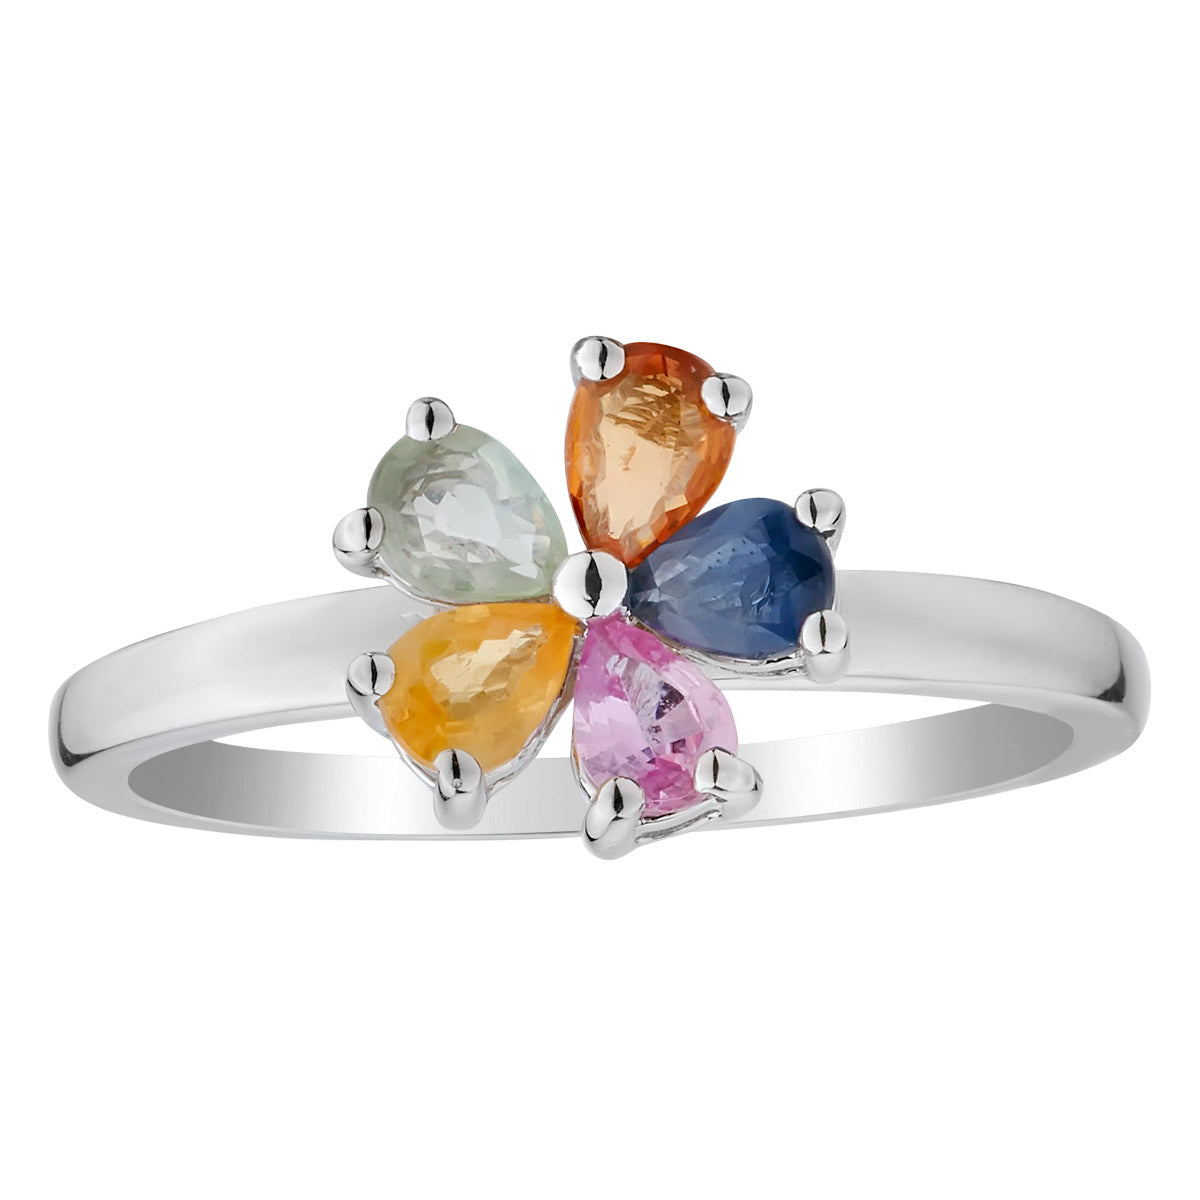 .75 Carat Genuine Multi-Colour Sapphire Flower Ring, Sterling Silver.......................NOW